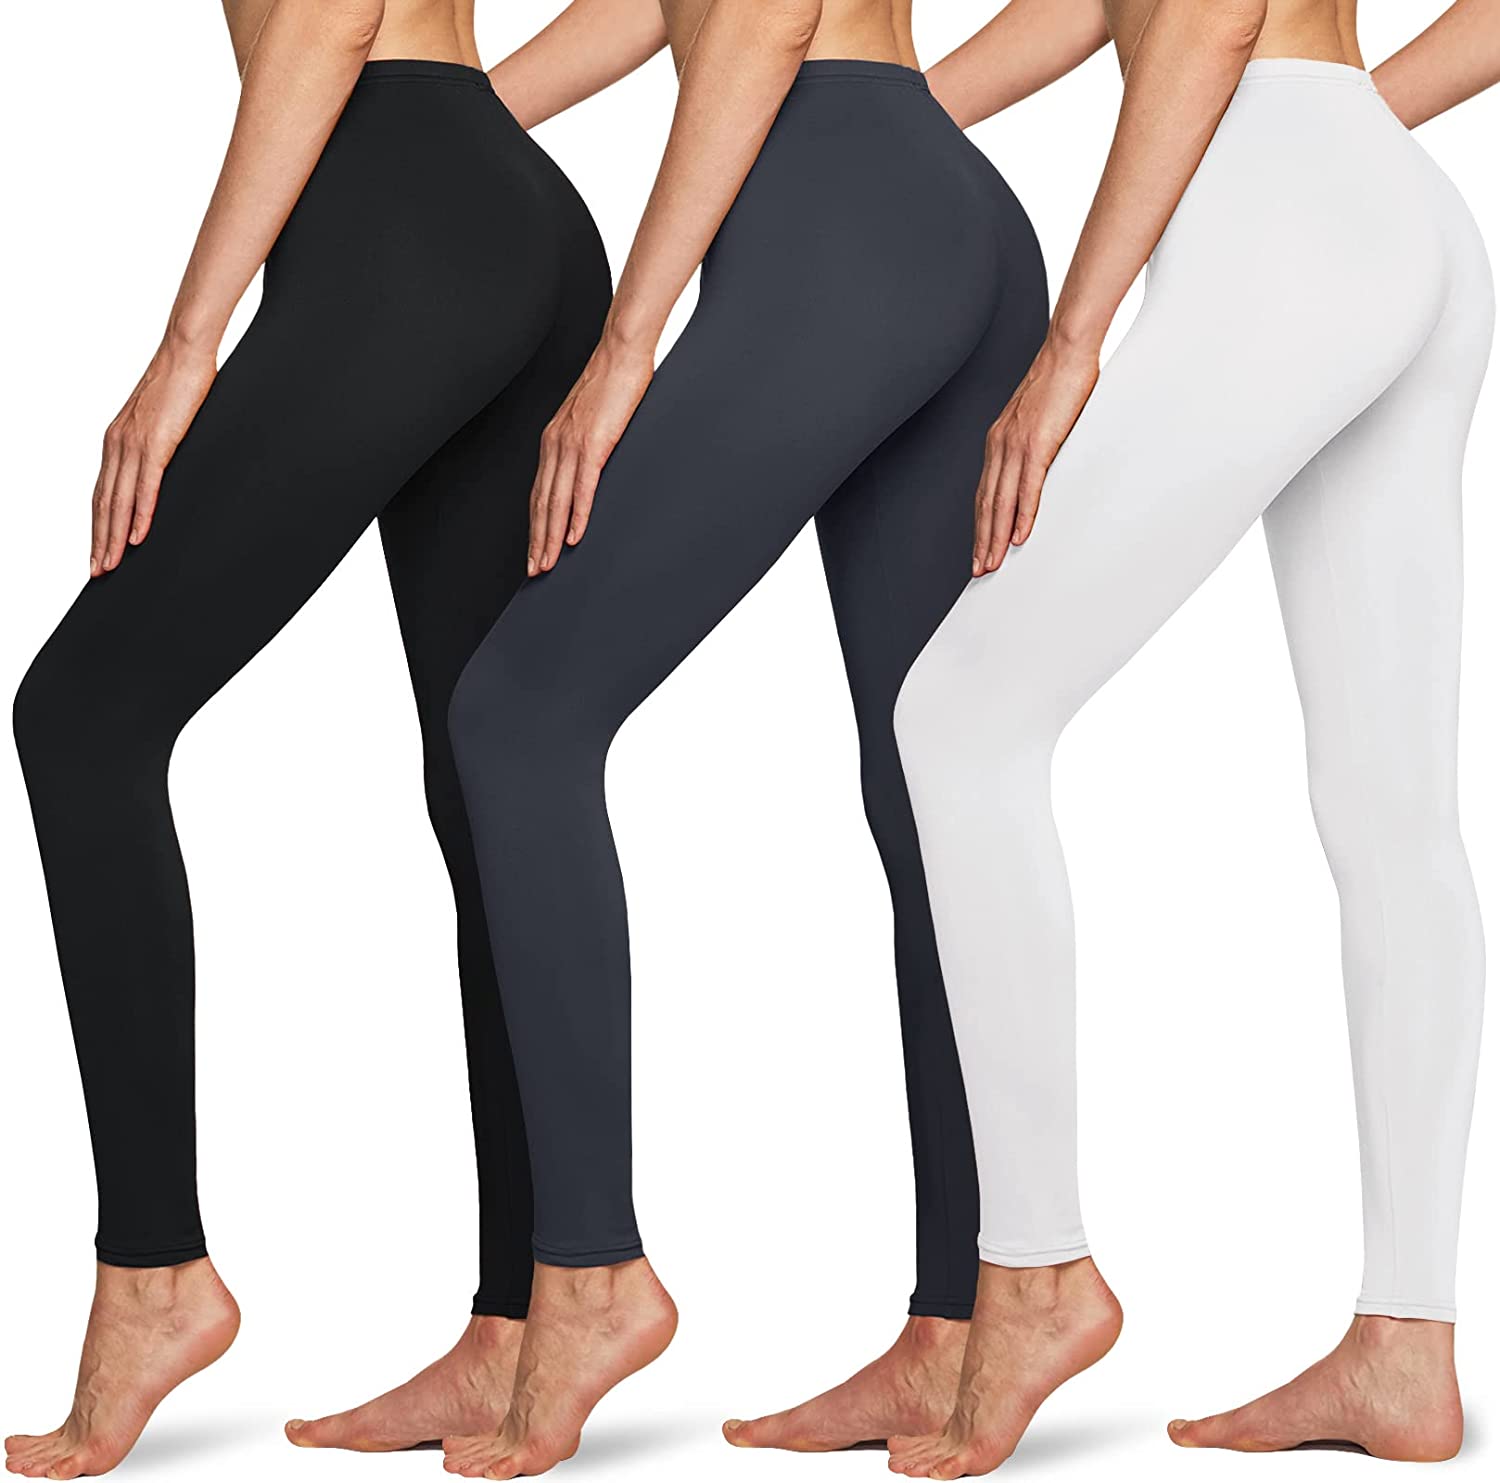 Winter Workout Running Tights High Waist Warm Fleece Lined Leggings ATHLIO 2 Pack Women's Thermal Yoga Pants 